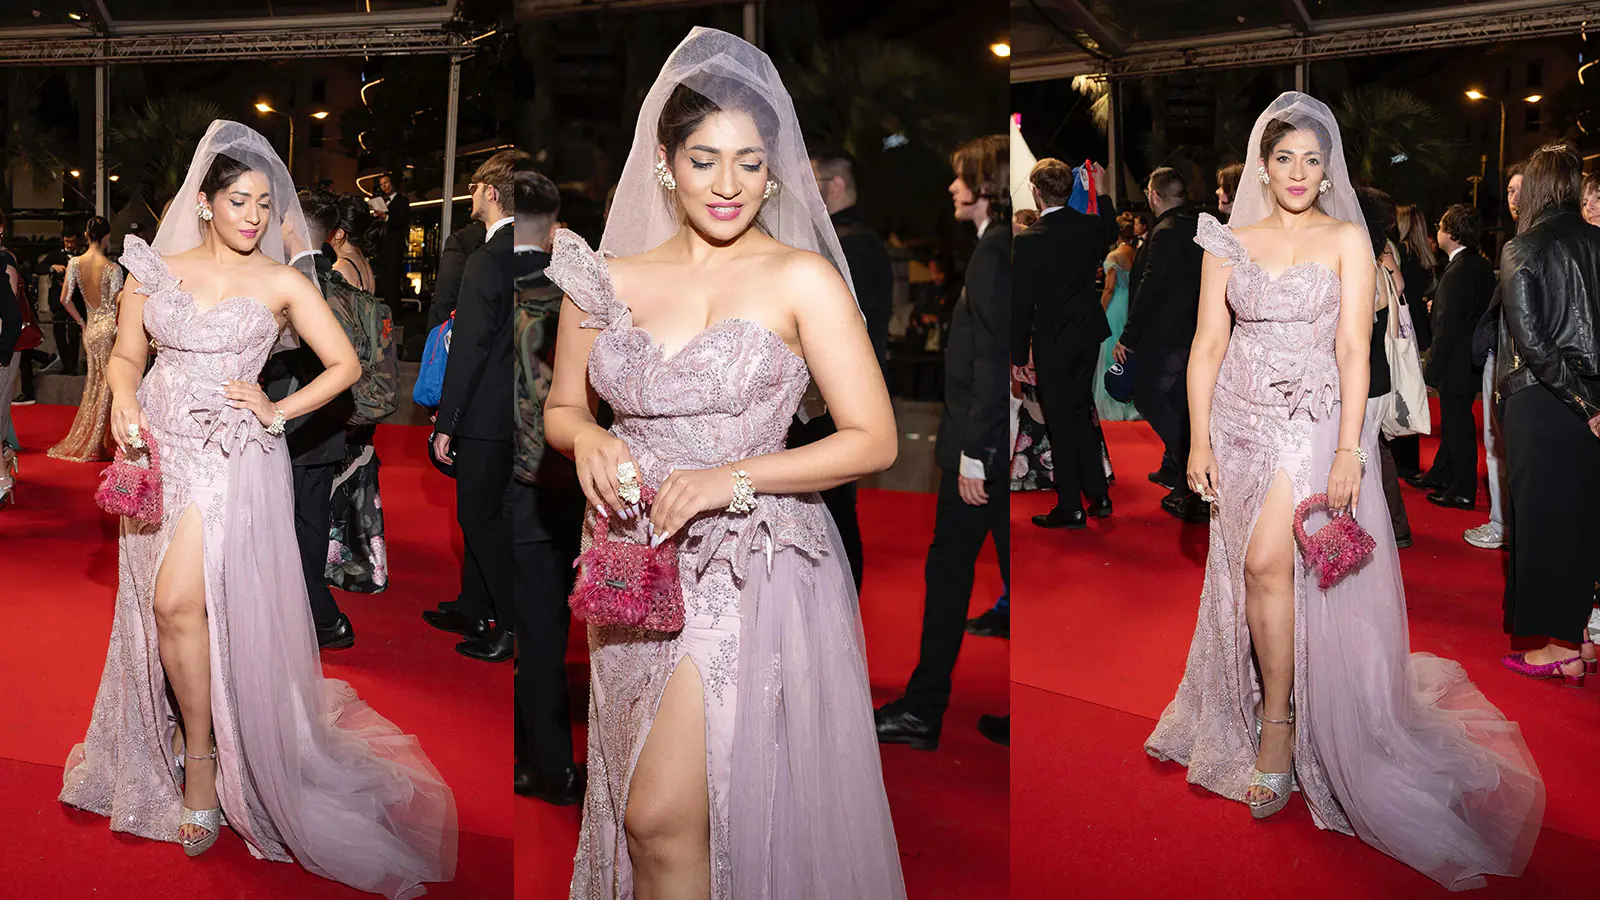 Iti Acharya Stuns in Catwalk Couture at Cannes for Third Year Running